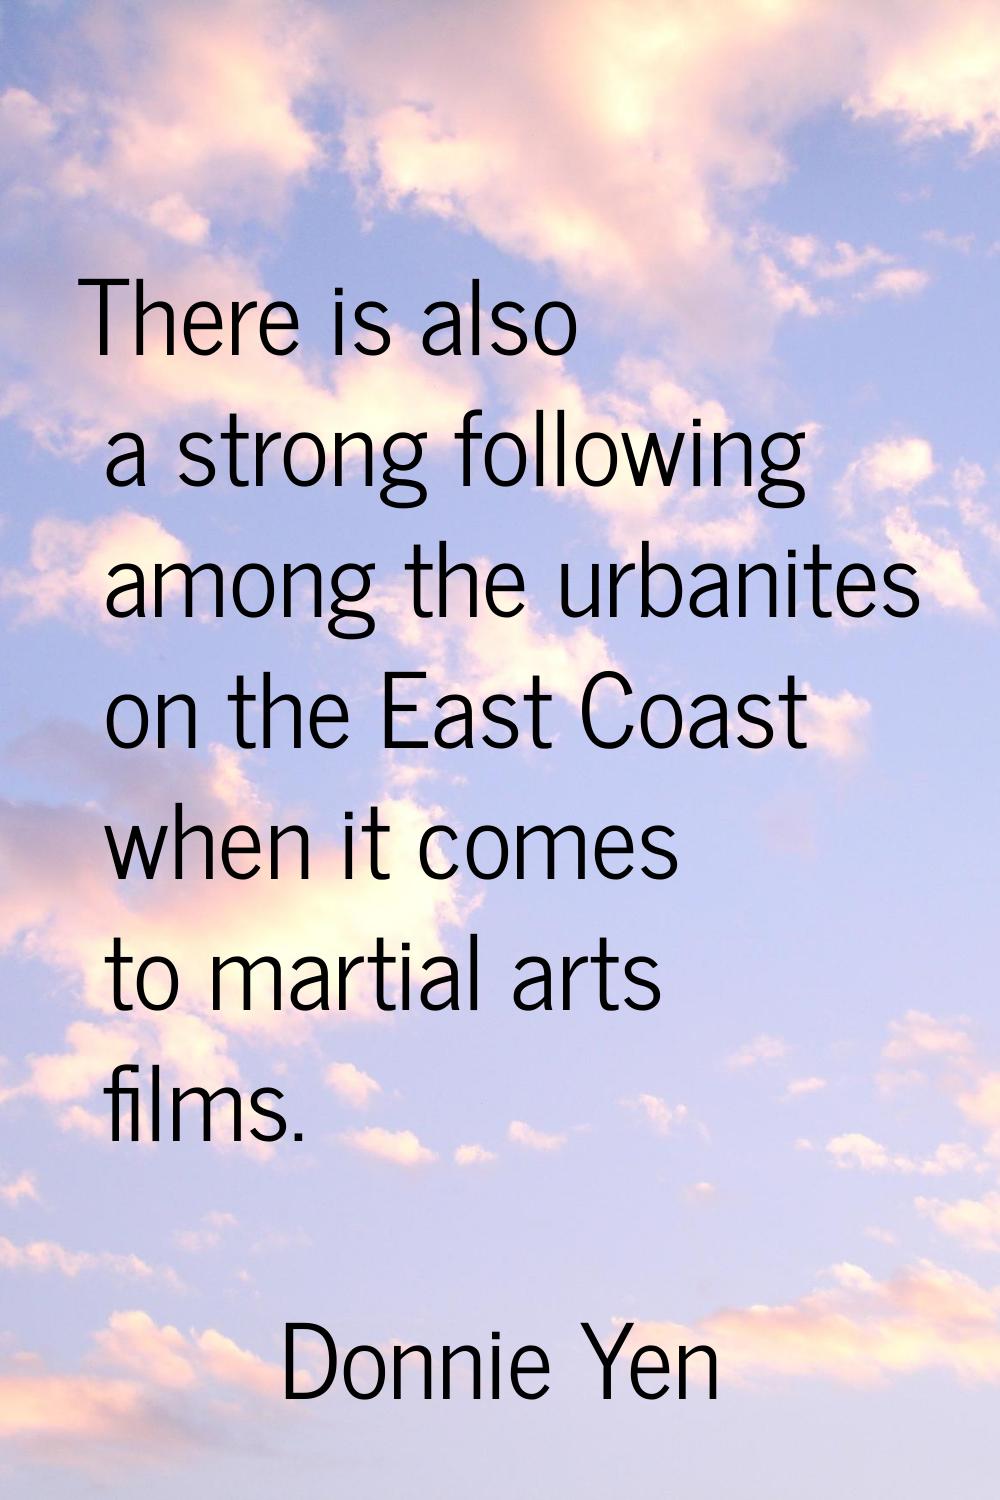 There is also a strong following among the urbanites on the East Coast when it comes to martial art